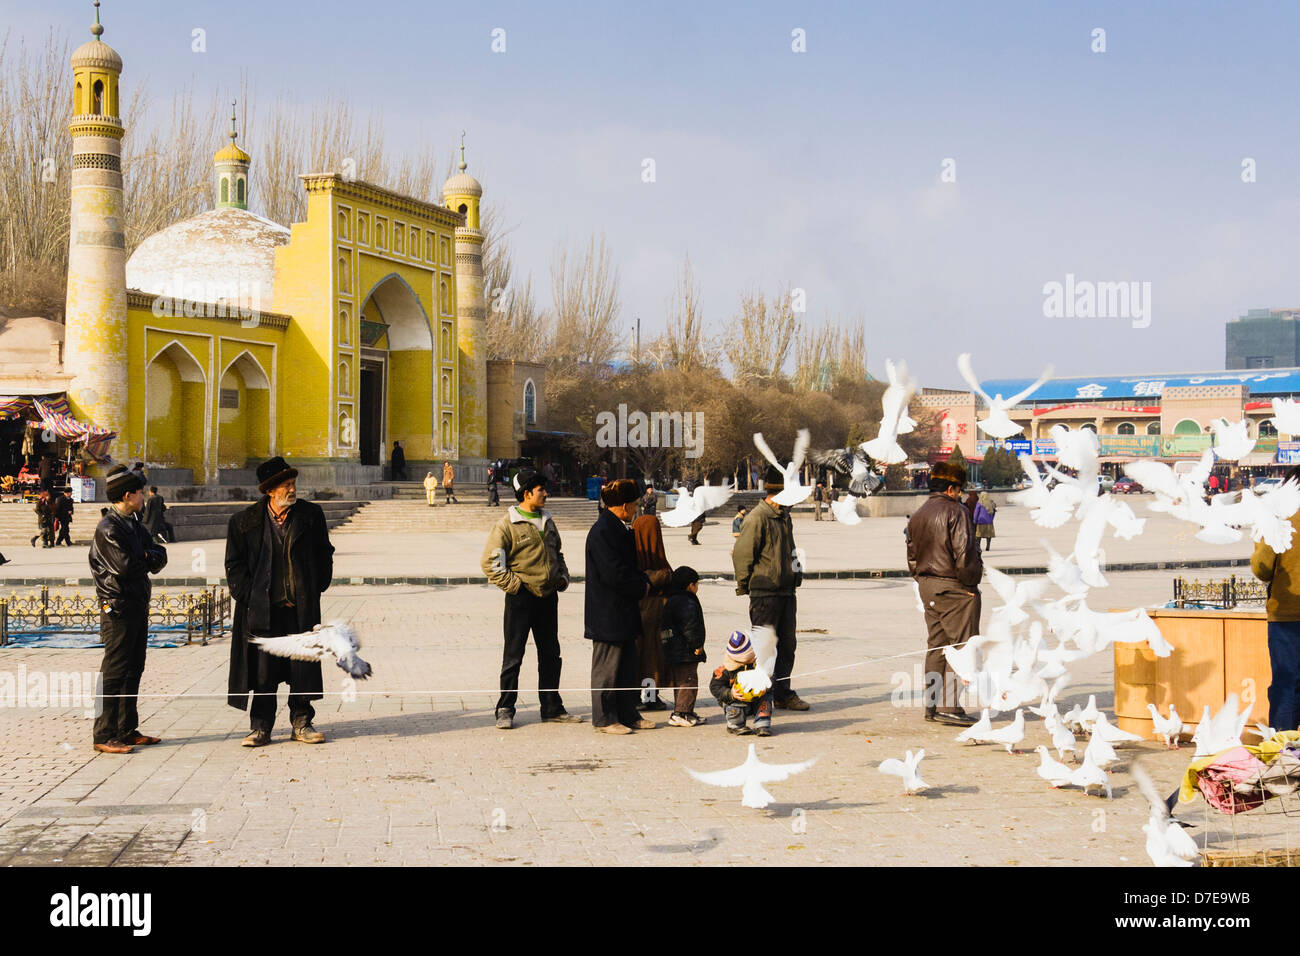 Uyghur men and doves by the Id Kah mosque in Kashgar, Xinjiang, China Stock Photo